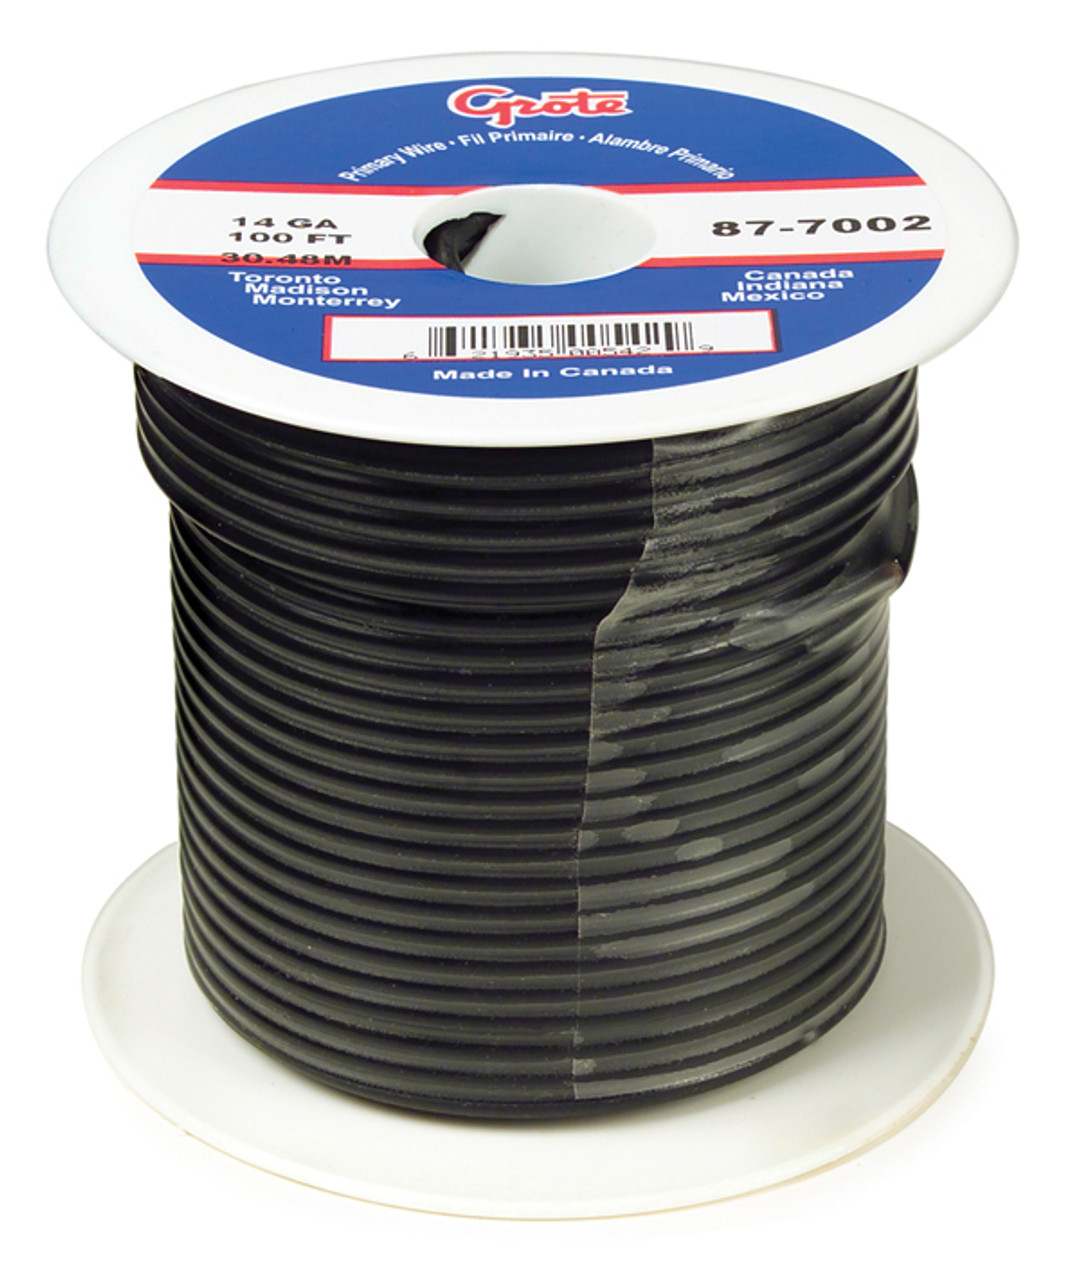 16 AWG General Purpose Thermo Plastic Wire @ 1000' - Black  88-8002